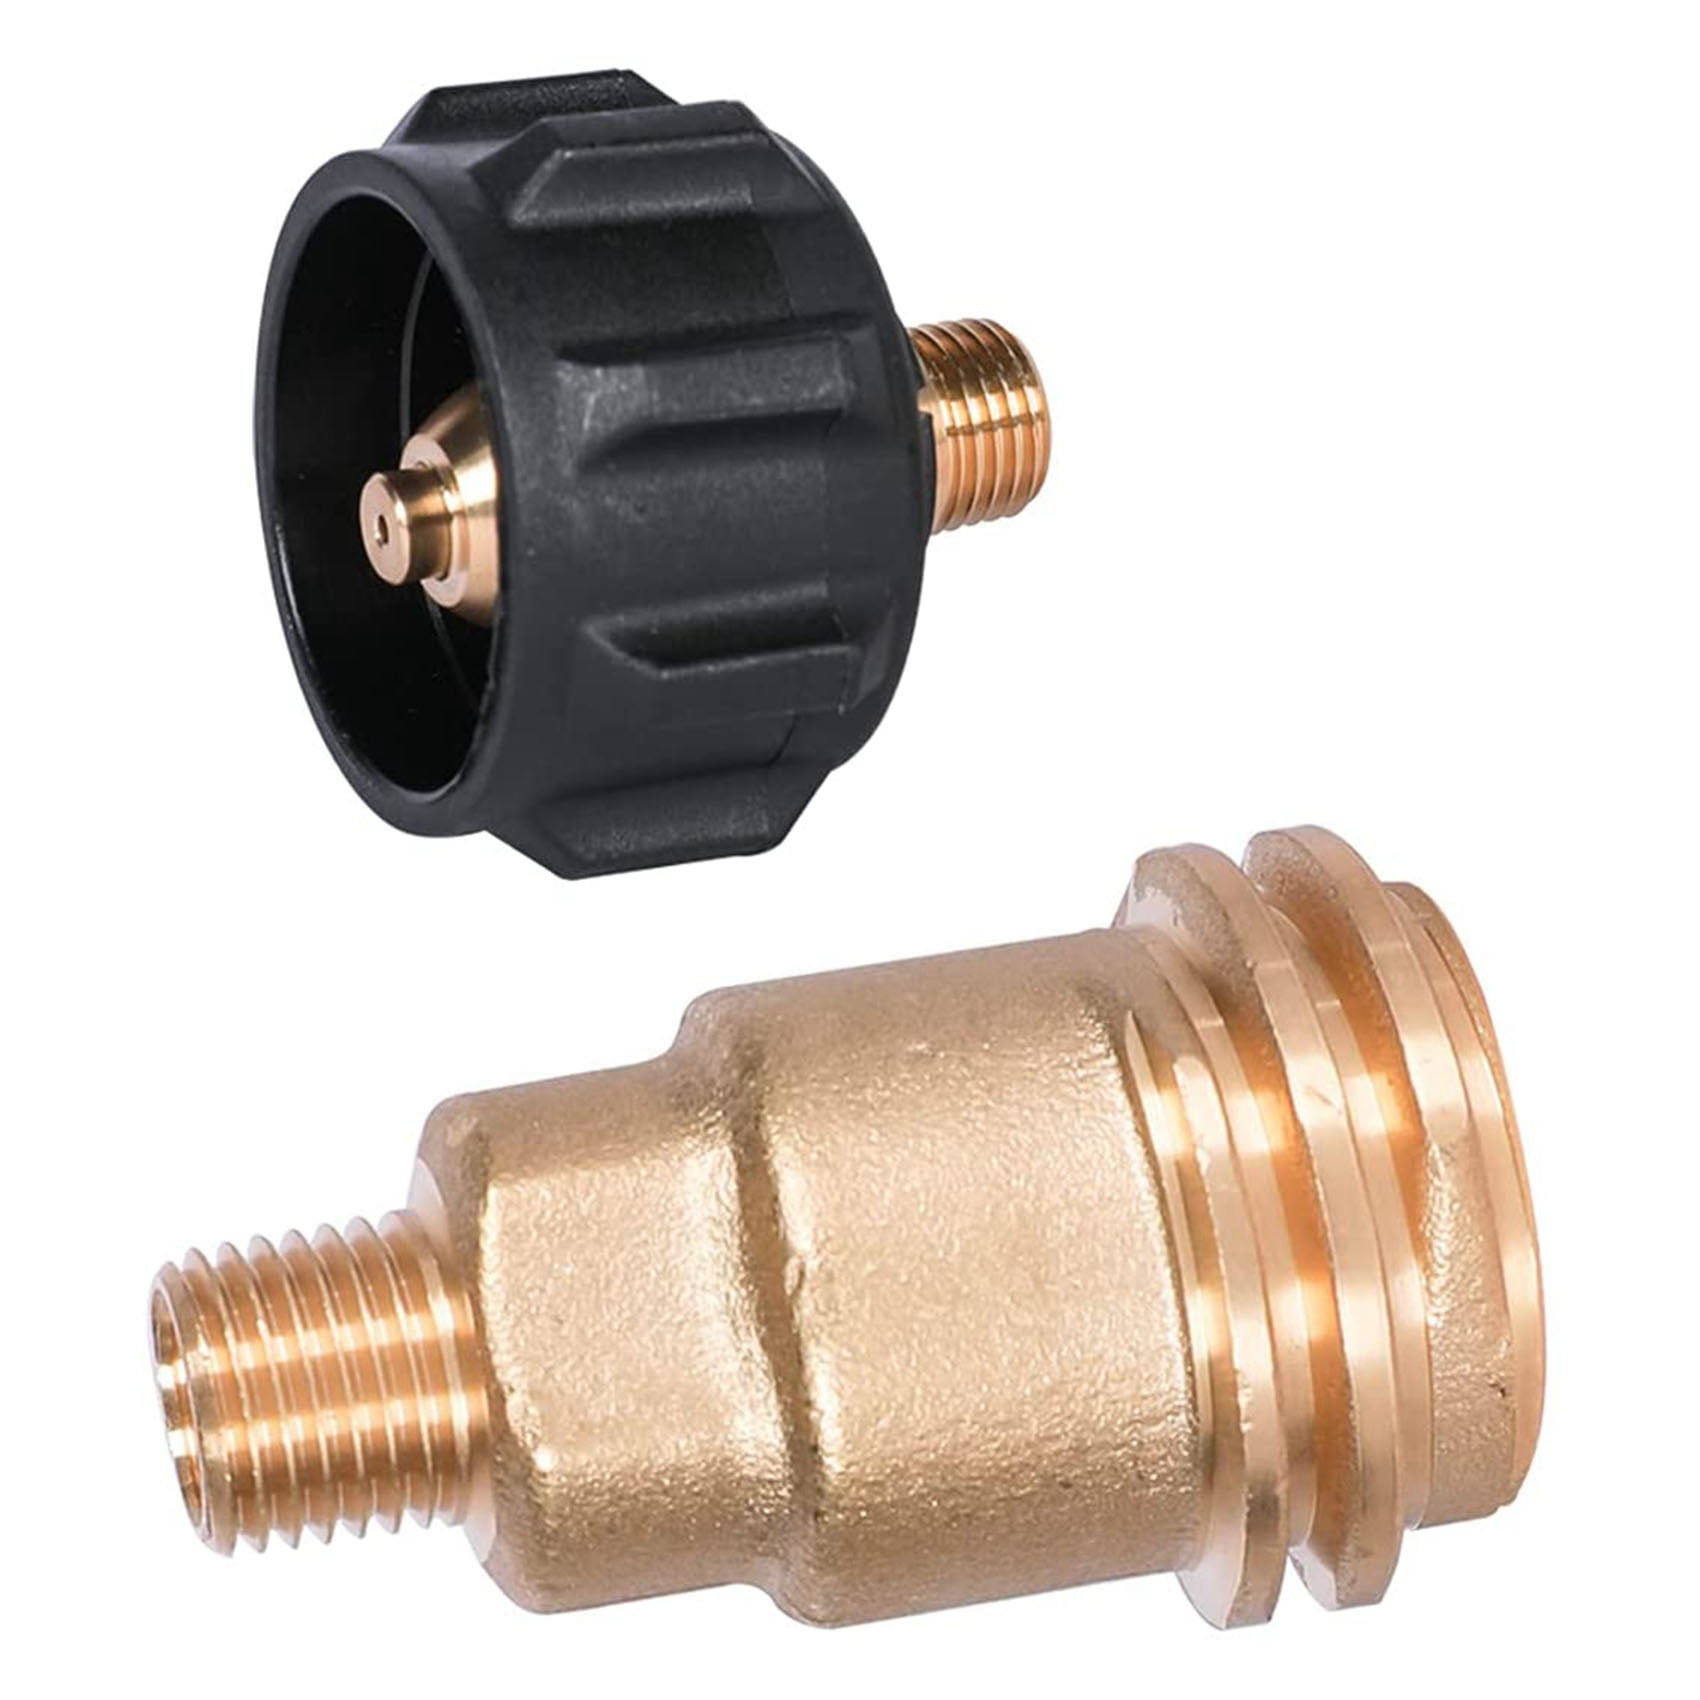 Grill Connectors & Hoses 5042 QCC1 ACME Nut Propane Gas Fitting Adapter With 1/4 